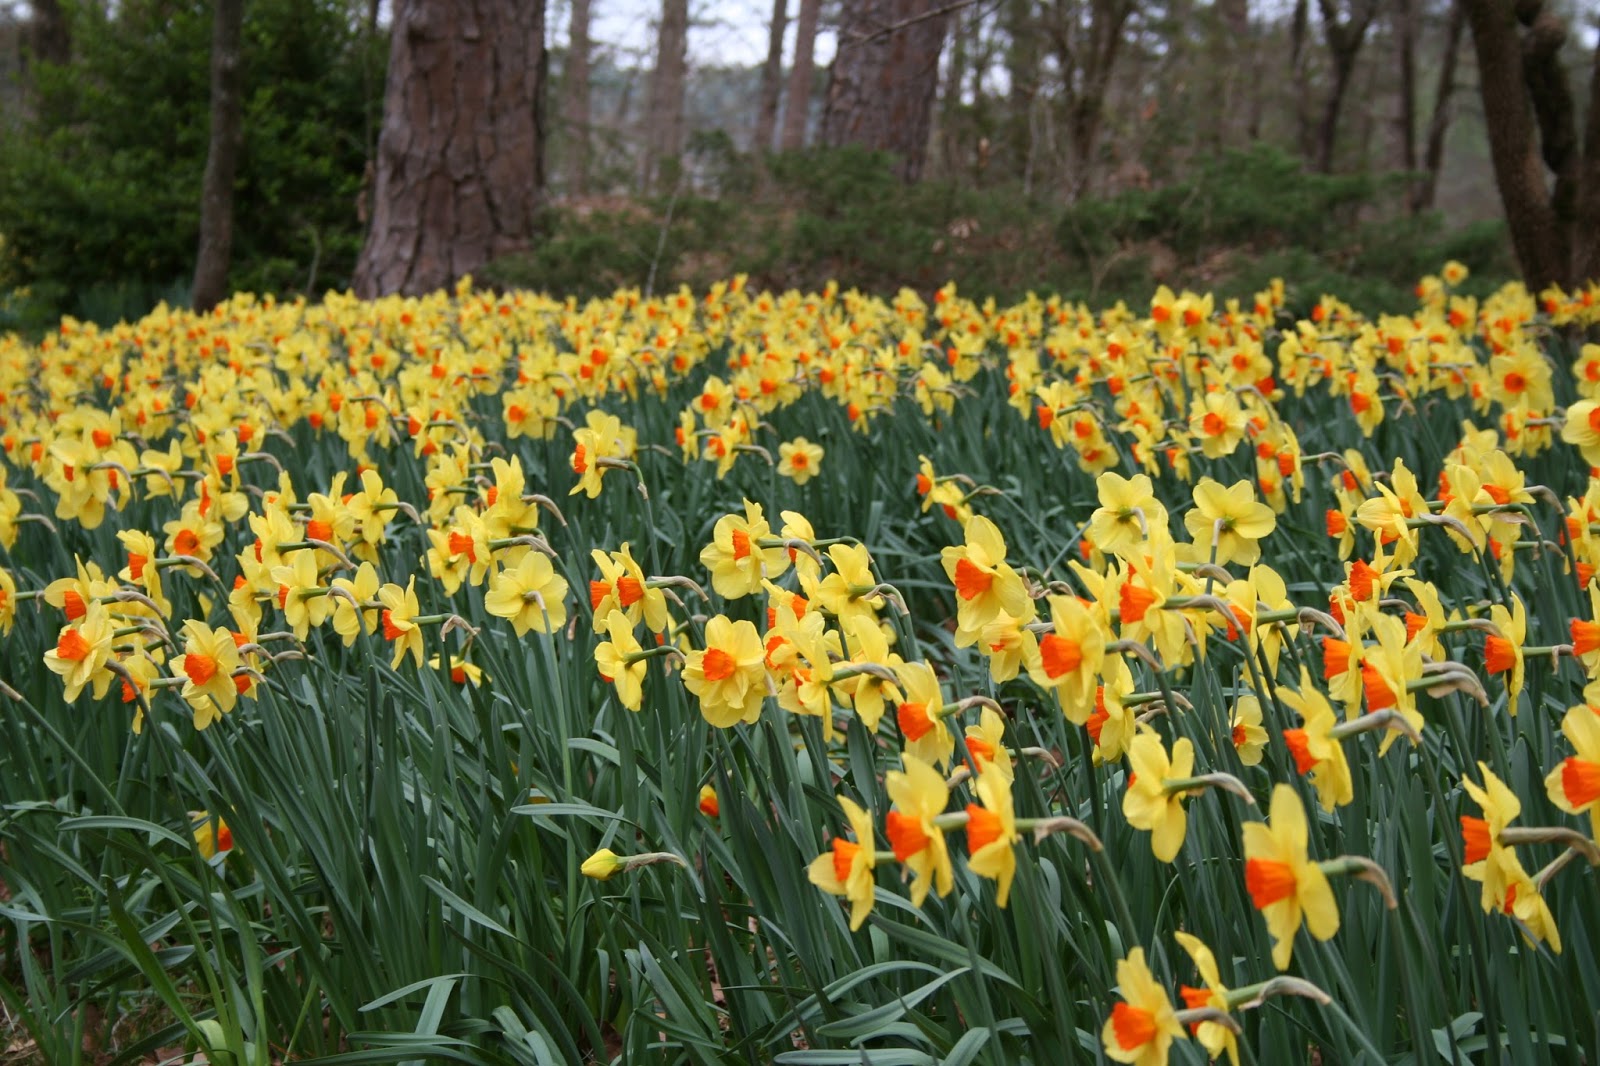 Weird, Wacky and Wild South: Spring blooming at Garvan Woodland Gardens